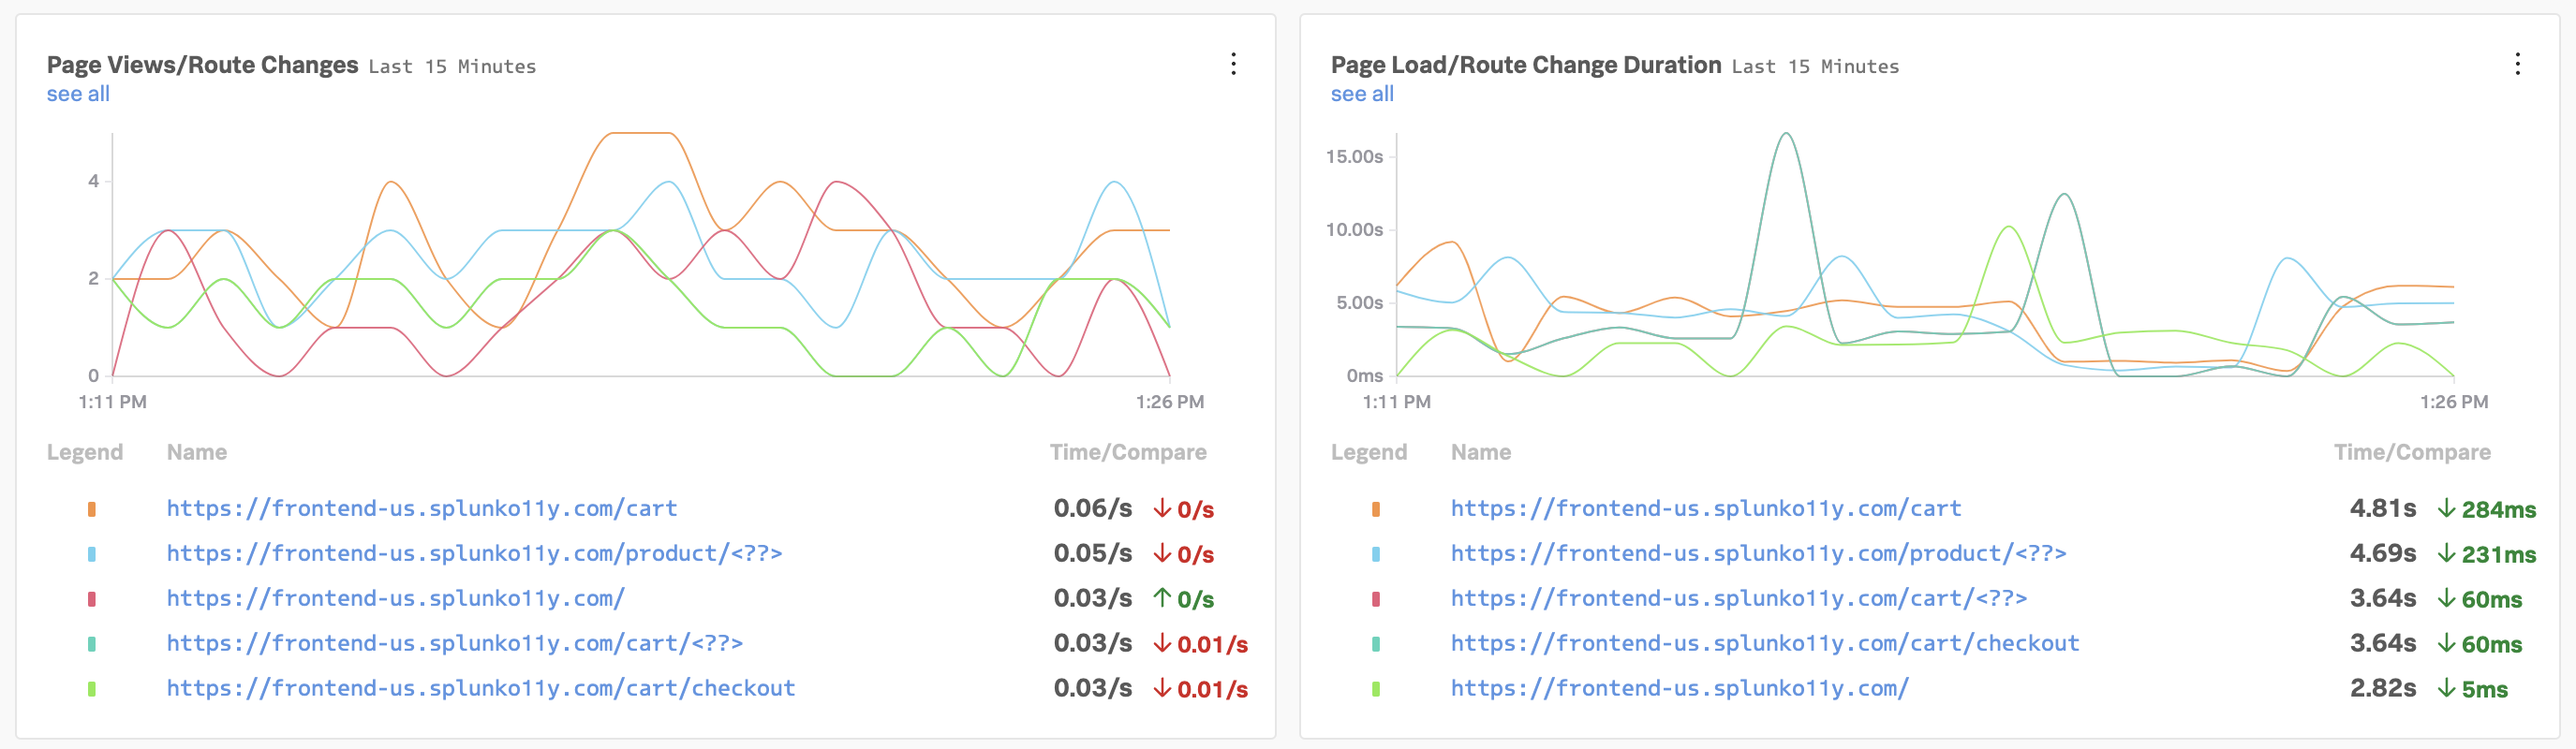 Page load and route change charts